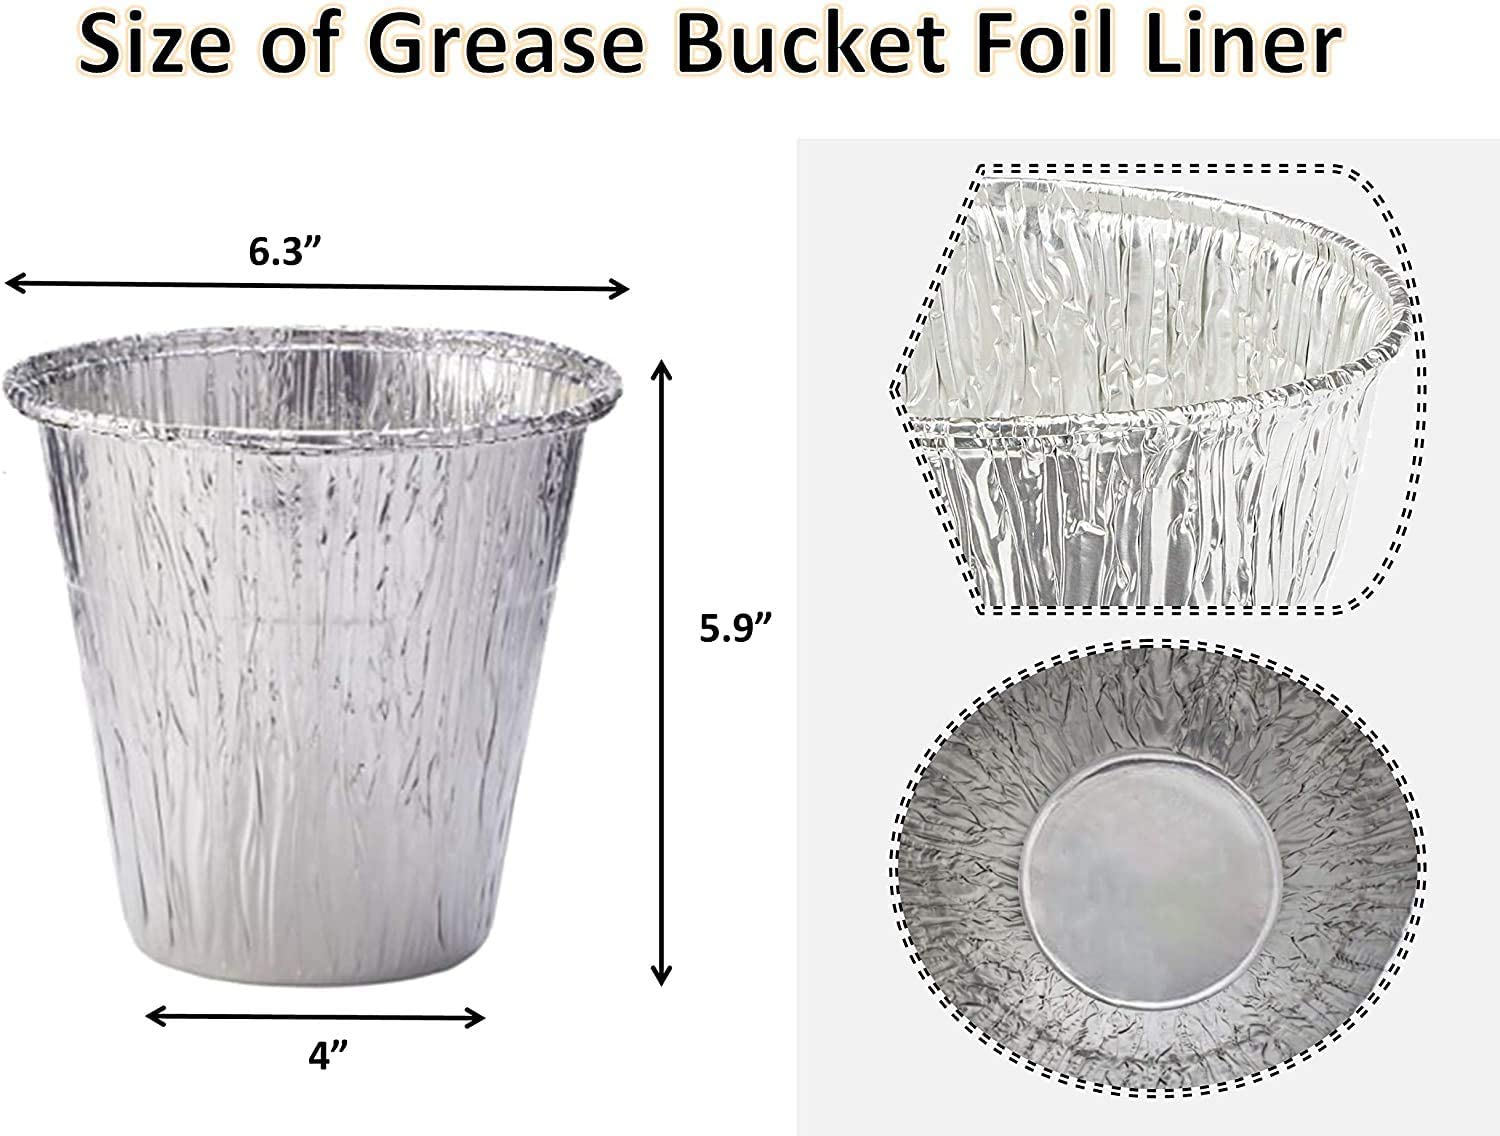 6 inch High Grease Bucket Liners Replacement for Pit Boss Grills 67292 Foil,Disposable Aluminum Drip Insert 